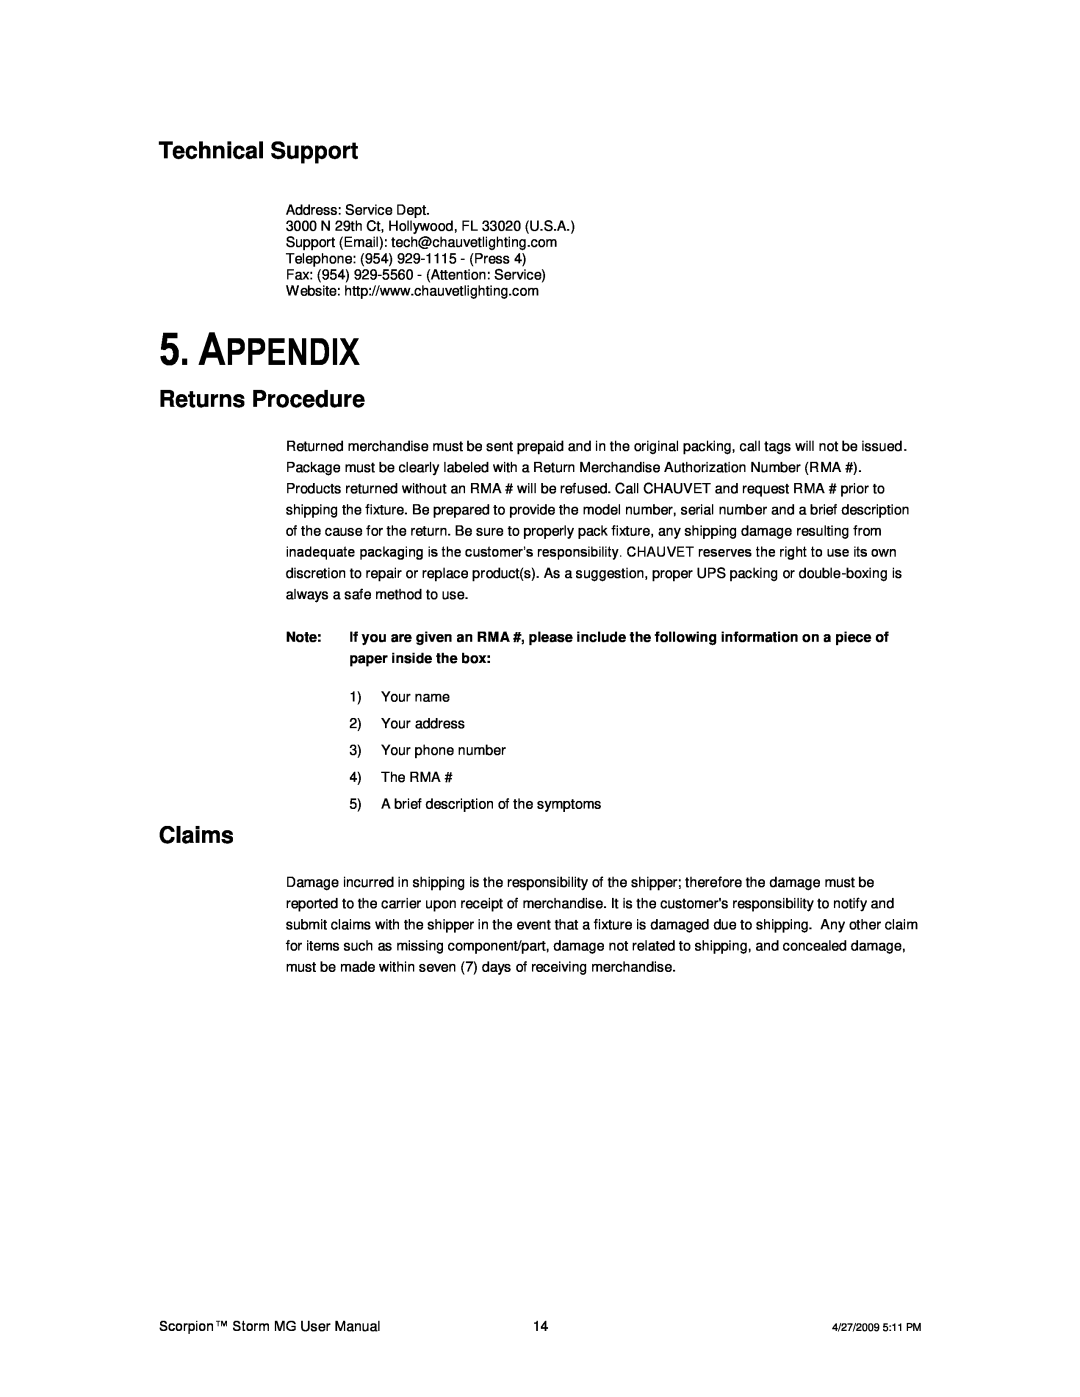 Chauvet CHAOVET user manual Appendix, Technical Support, Returns Procedure, Claims, paper inside the box 